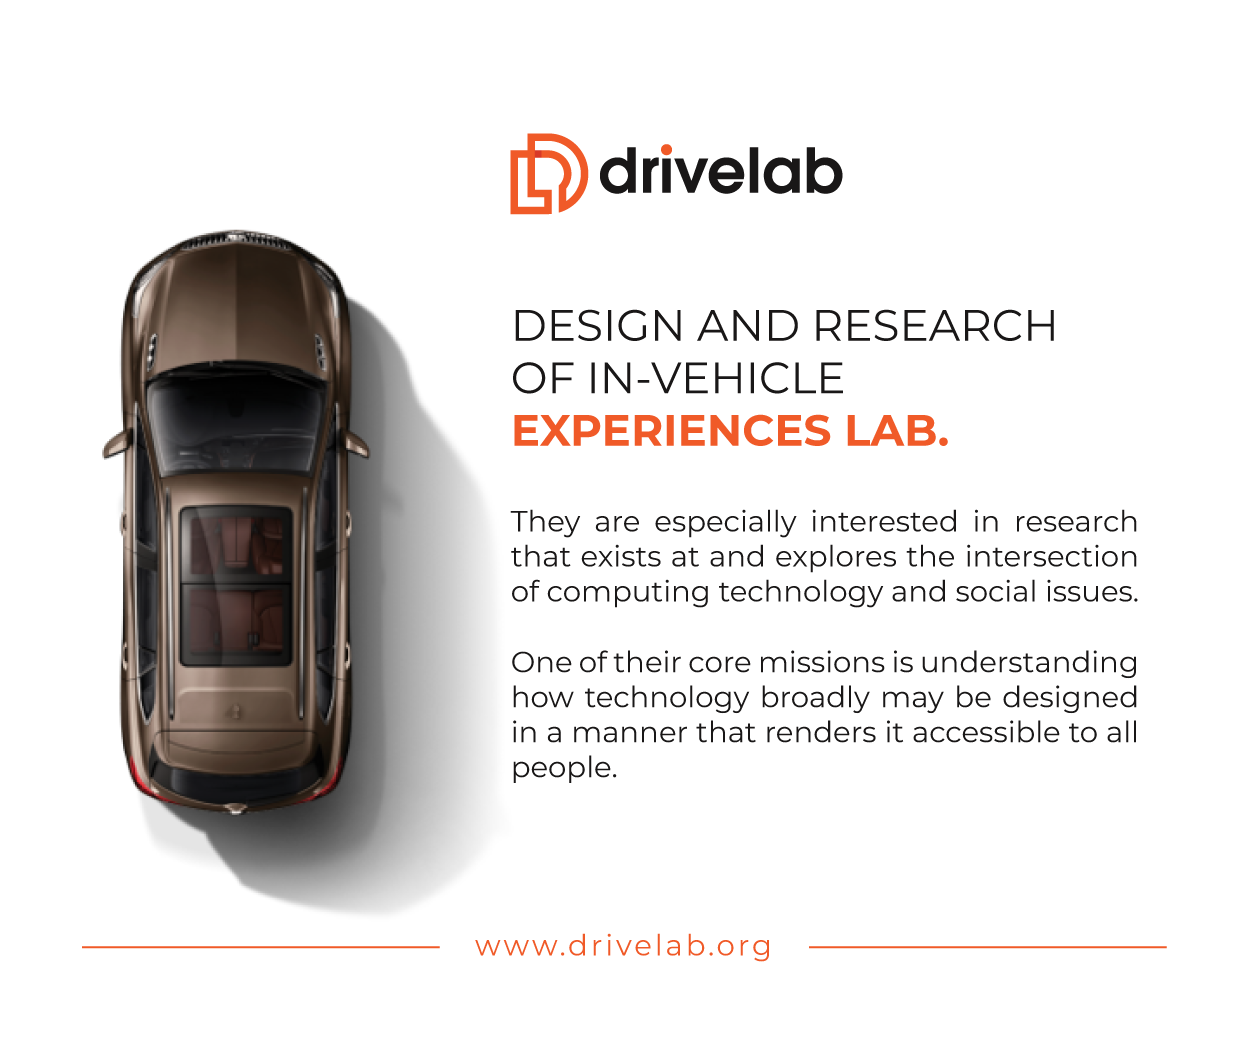 DriveLab the Design and Research of In-Vehicle Experiences Lab Logo Implementation Image